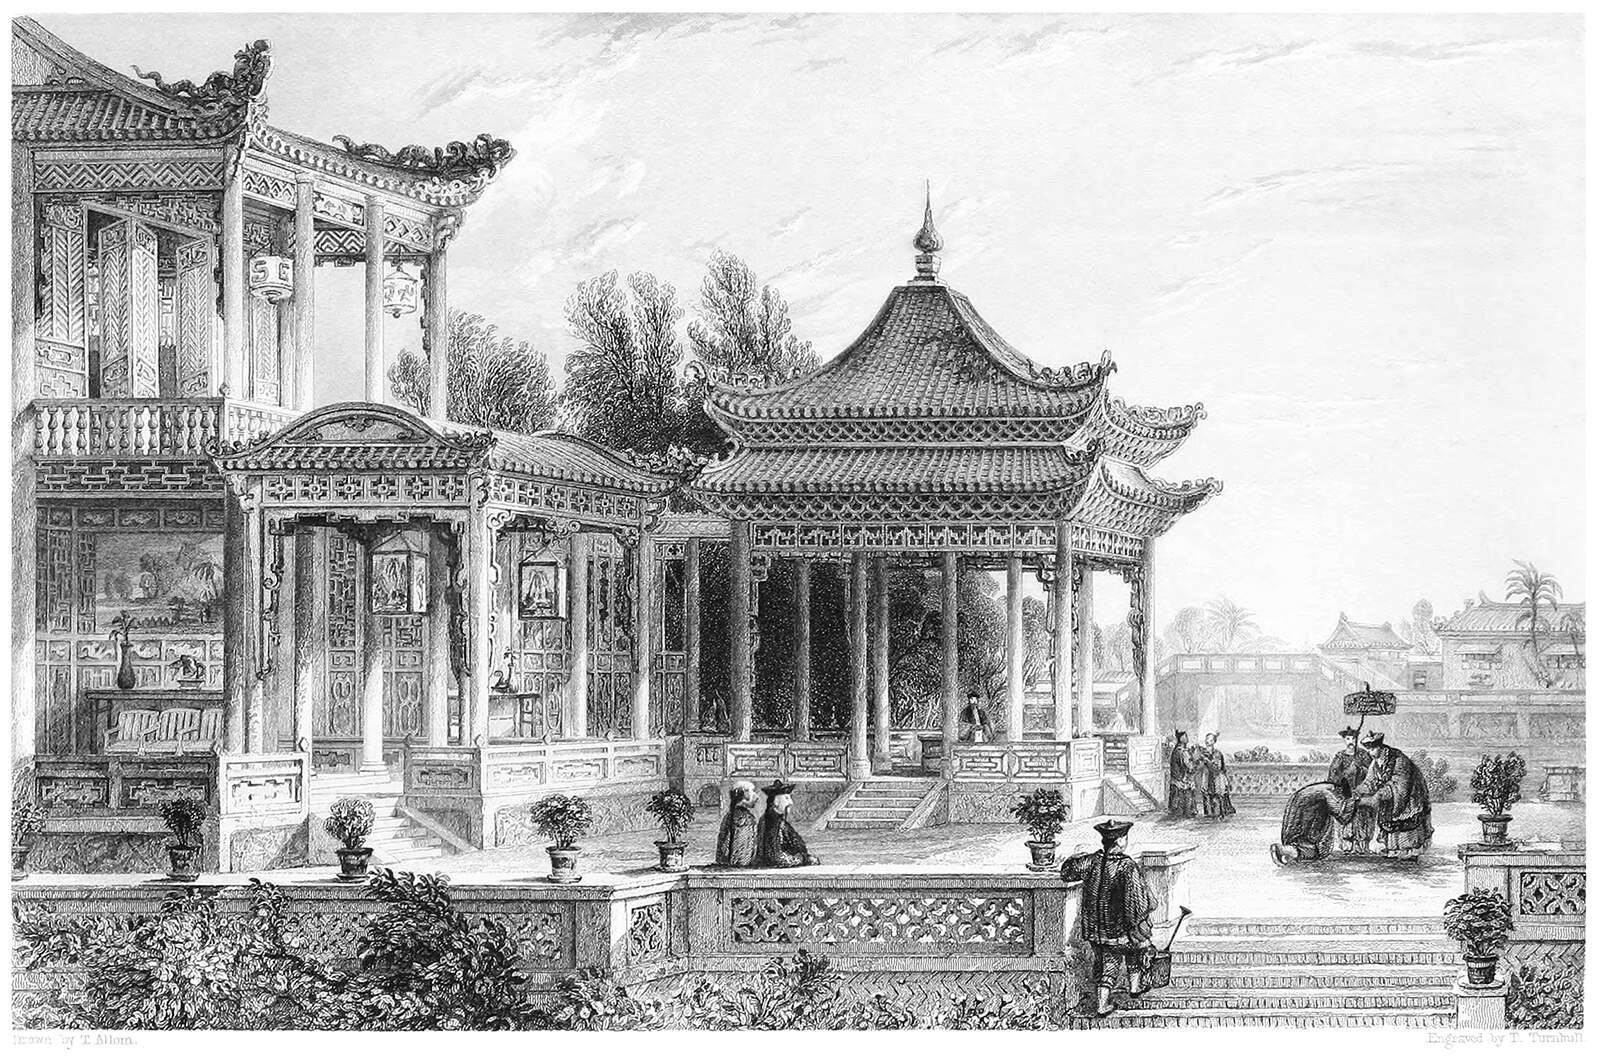 Pavilion of the Star of Hope